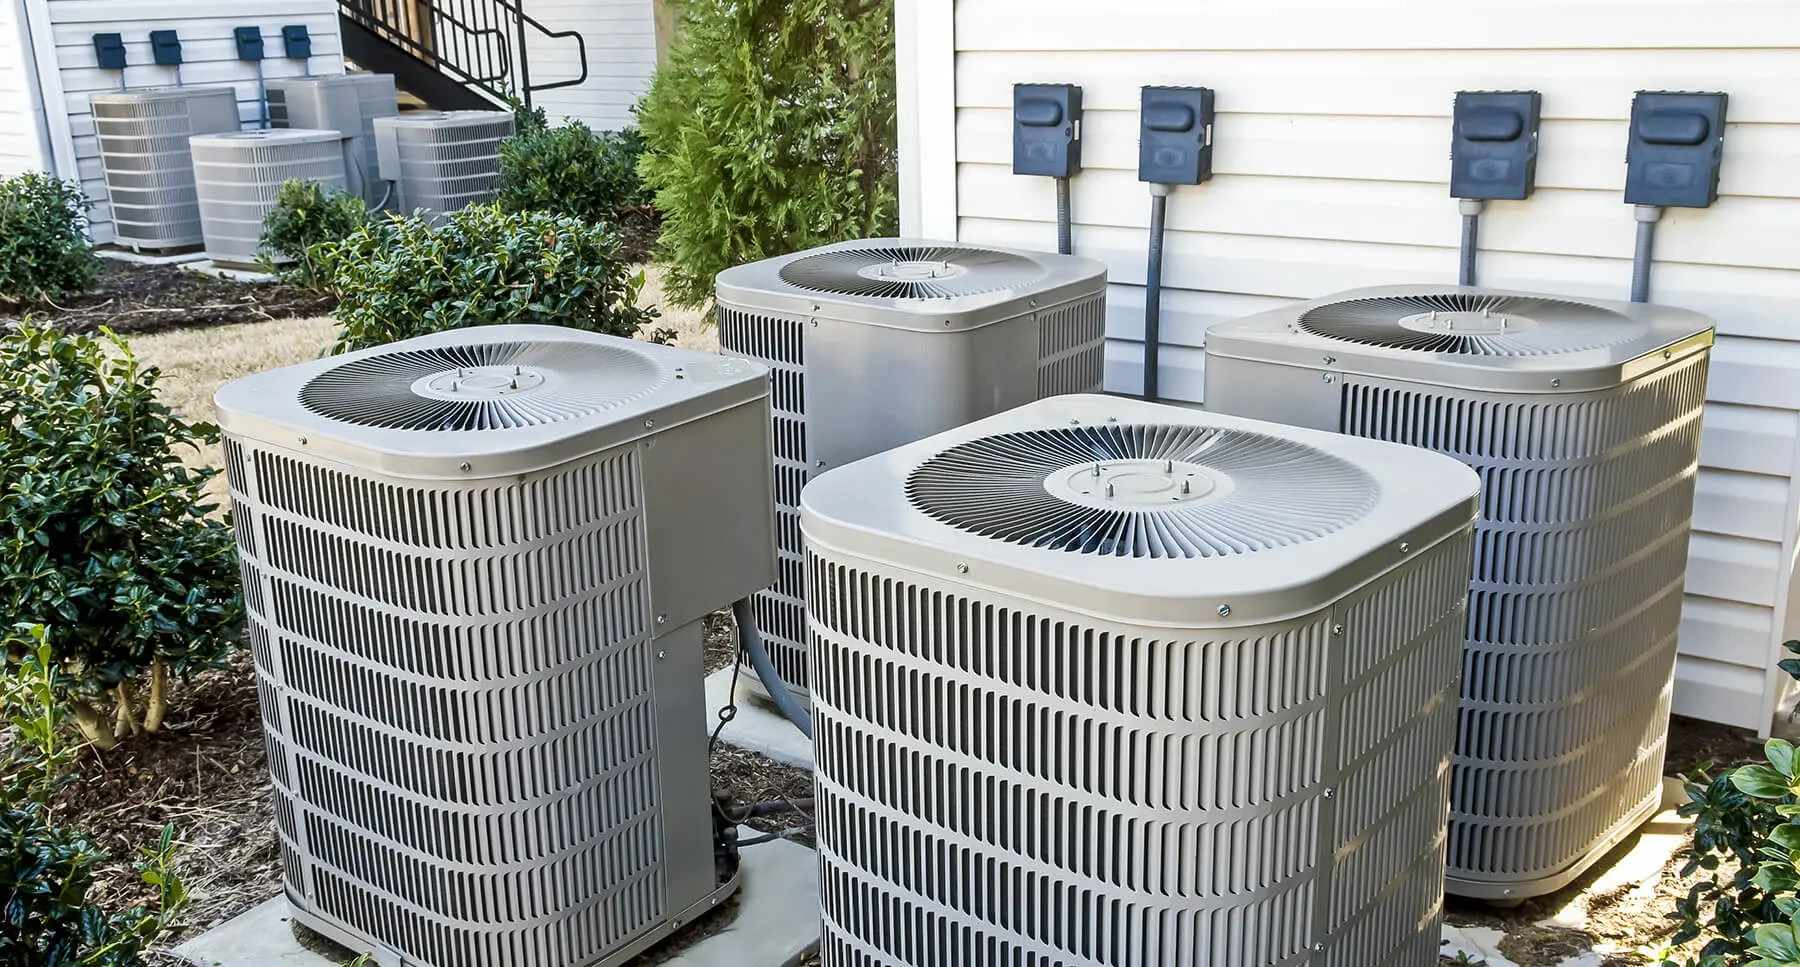 HVAC units outside of a multifamily apartment building